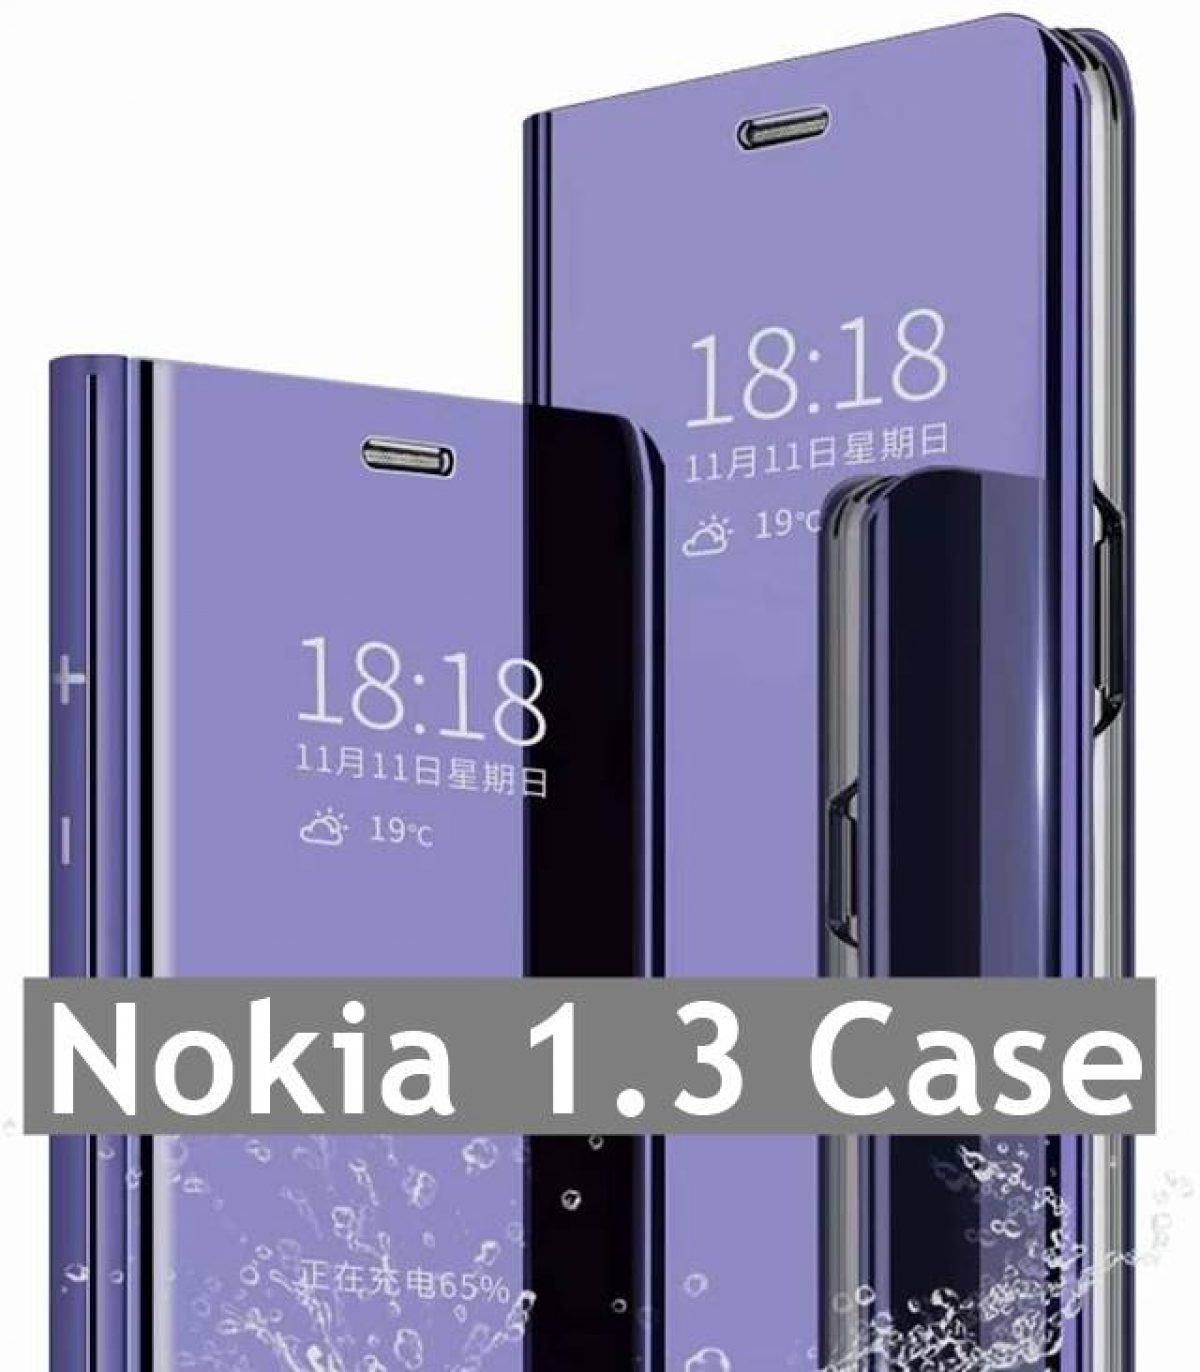 Transparent/Clear Peakally Nokia 1.3 Case Soft TPU Transparent Protector Case Cover with Shock Absorption Bumper Corners for Nokia 1.3